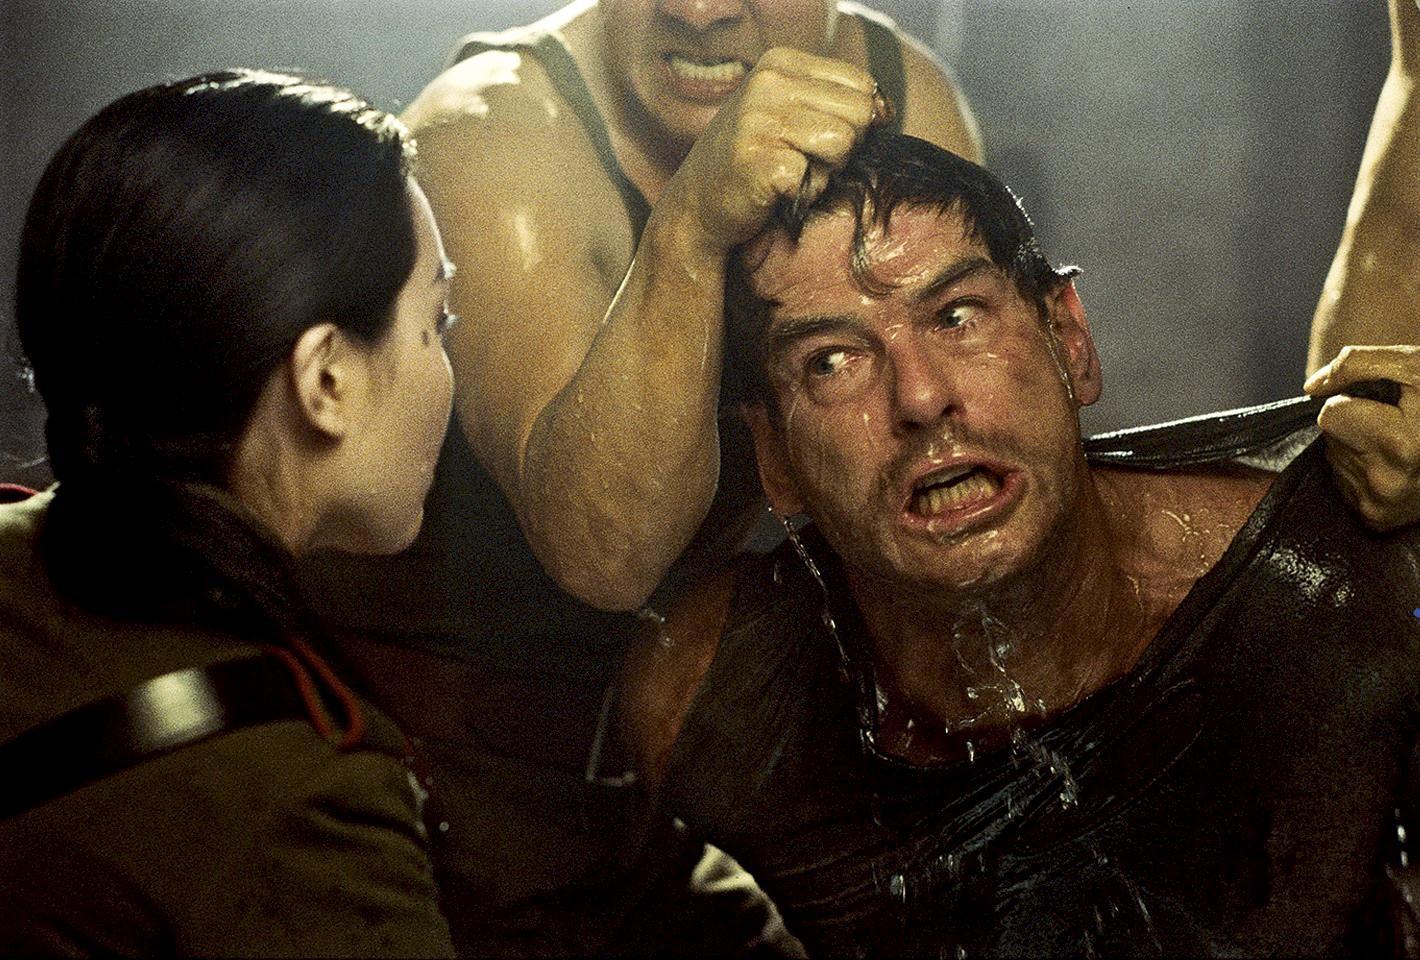 Torture scene in "Die Another Day"